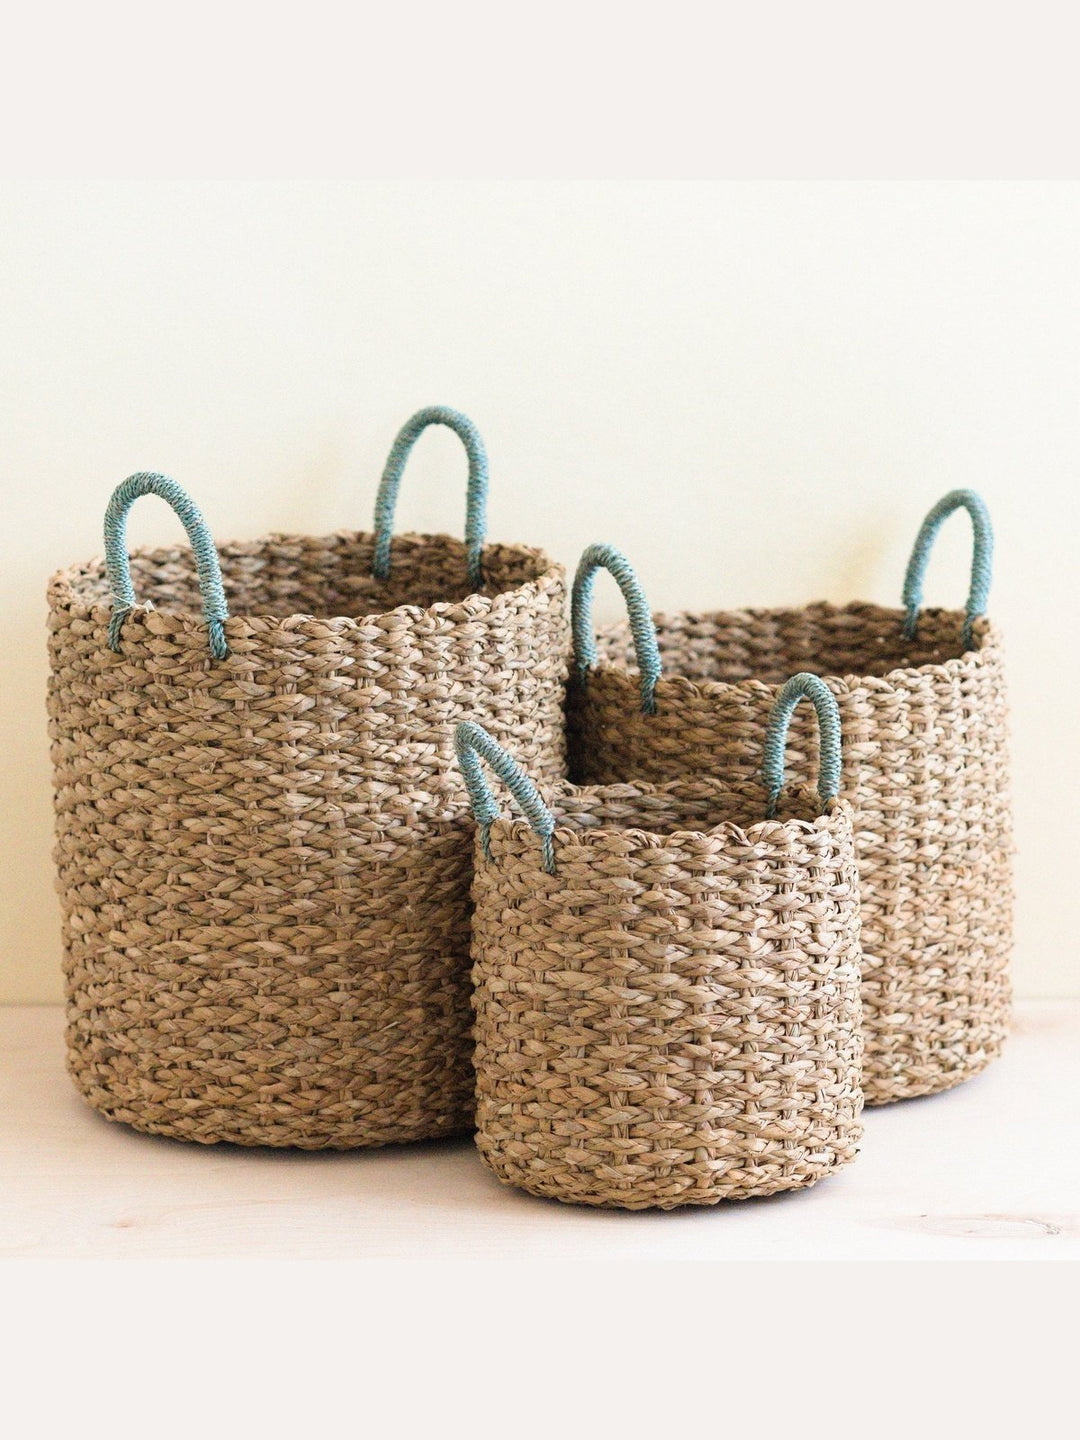 Home DecorSeagrass Woven Baskets with Sky Blue Handle Set of 3 - Straw BasketsLIKHÂ